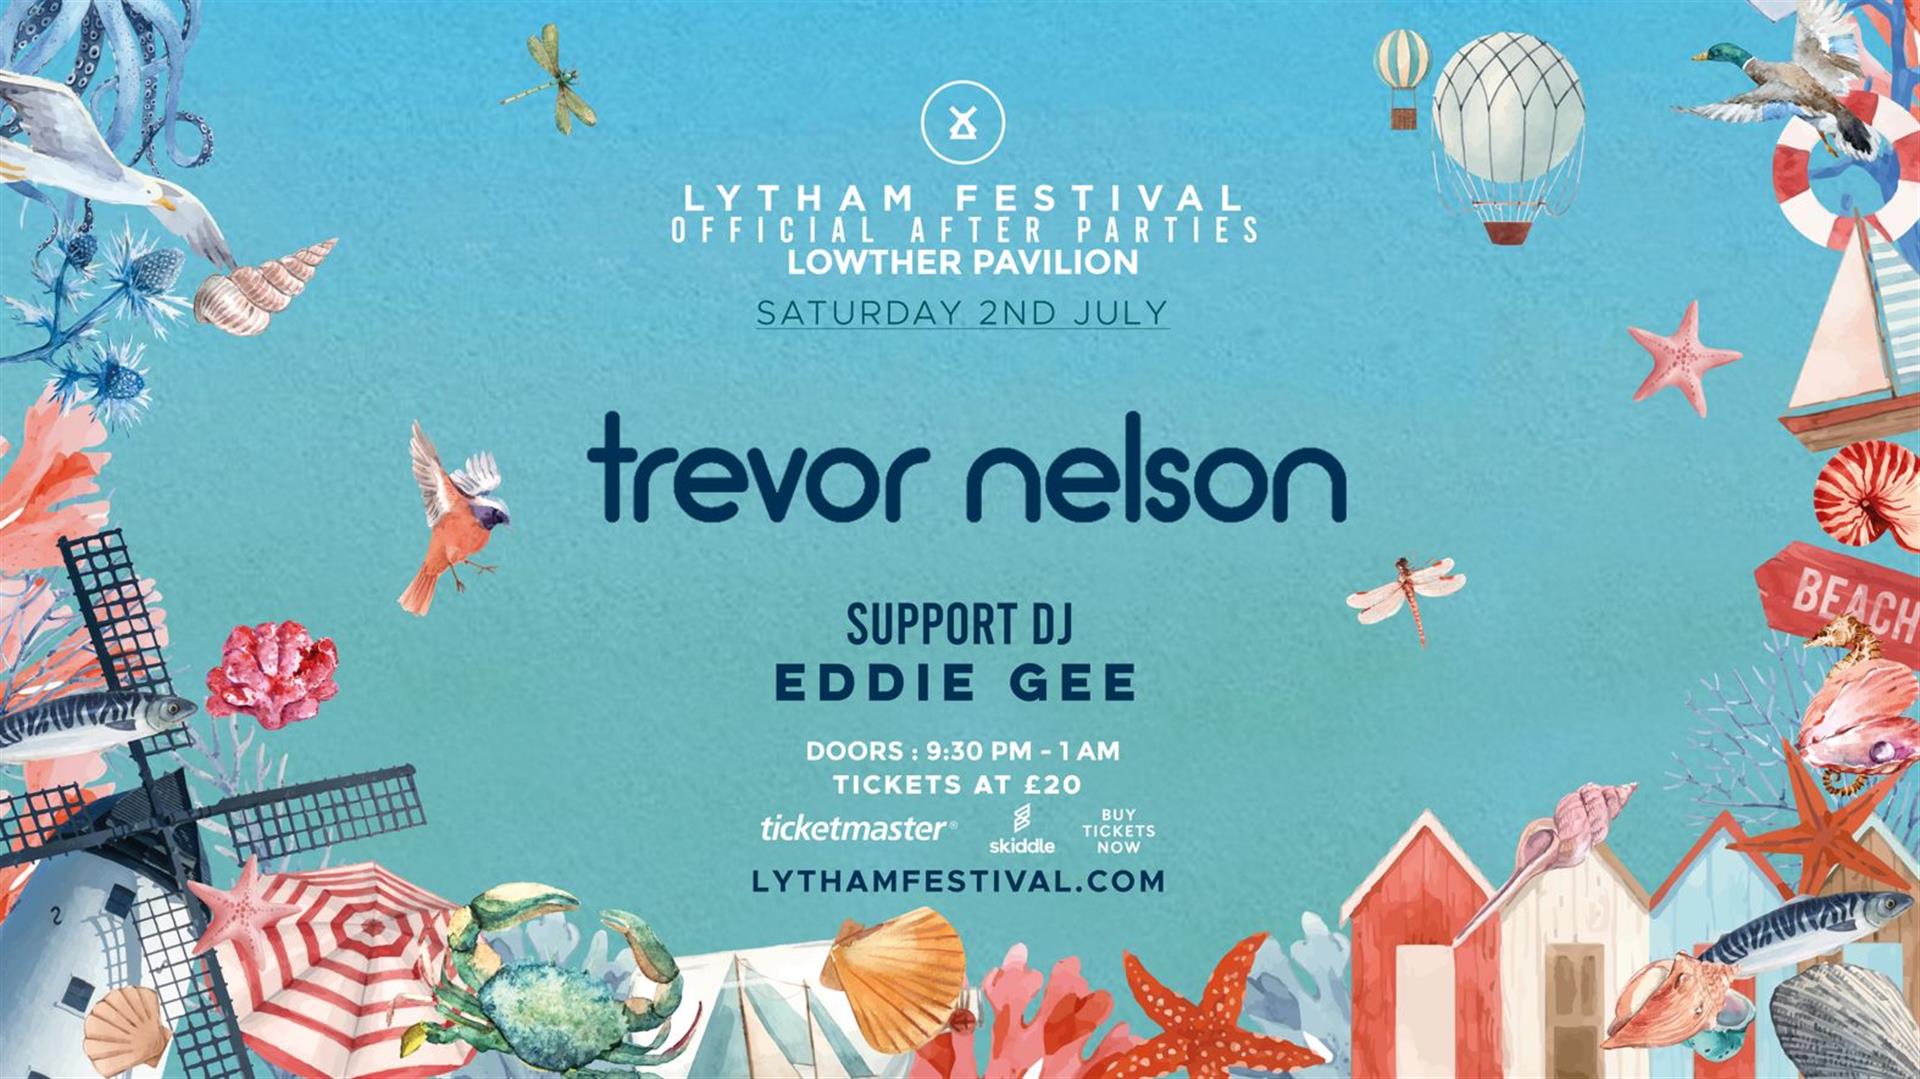 Lytham Festival Official After Parties – Trevor Nelson - Lowther Pavilion